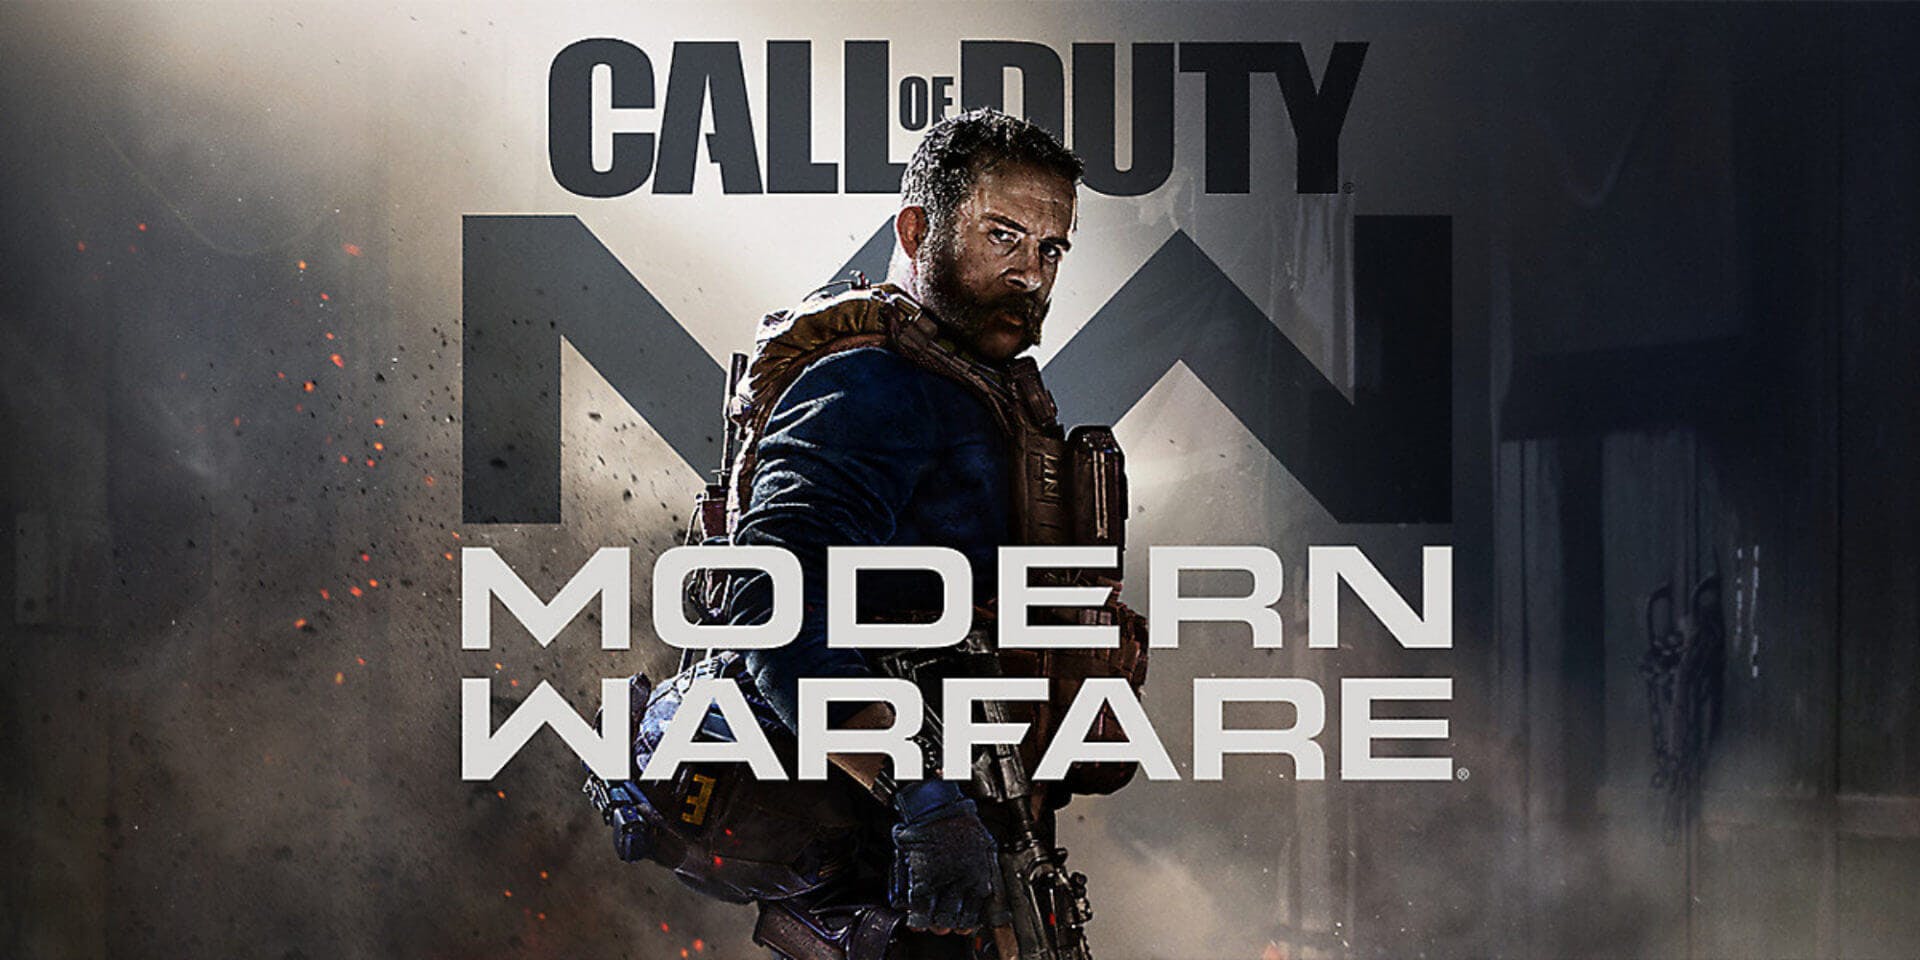 upcoming video games october 2019 call of duty modern warfare